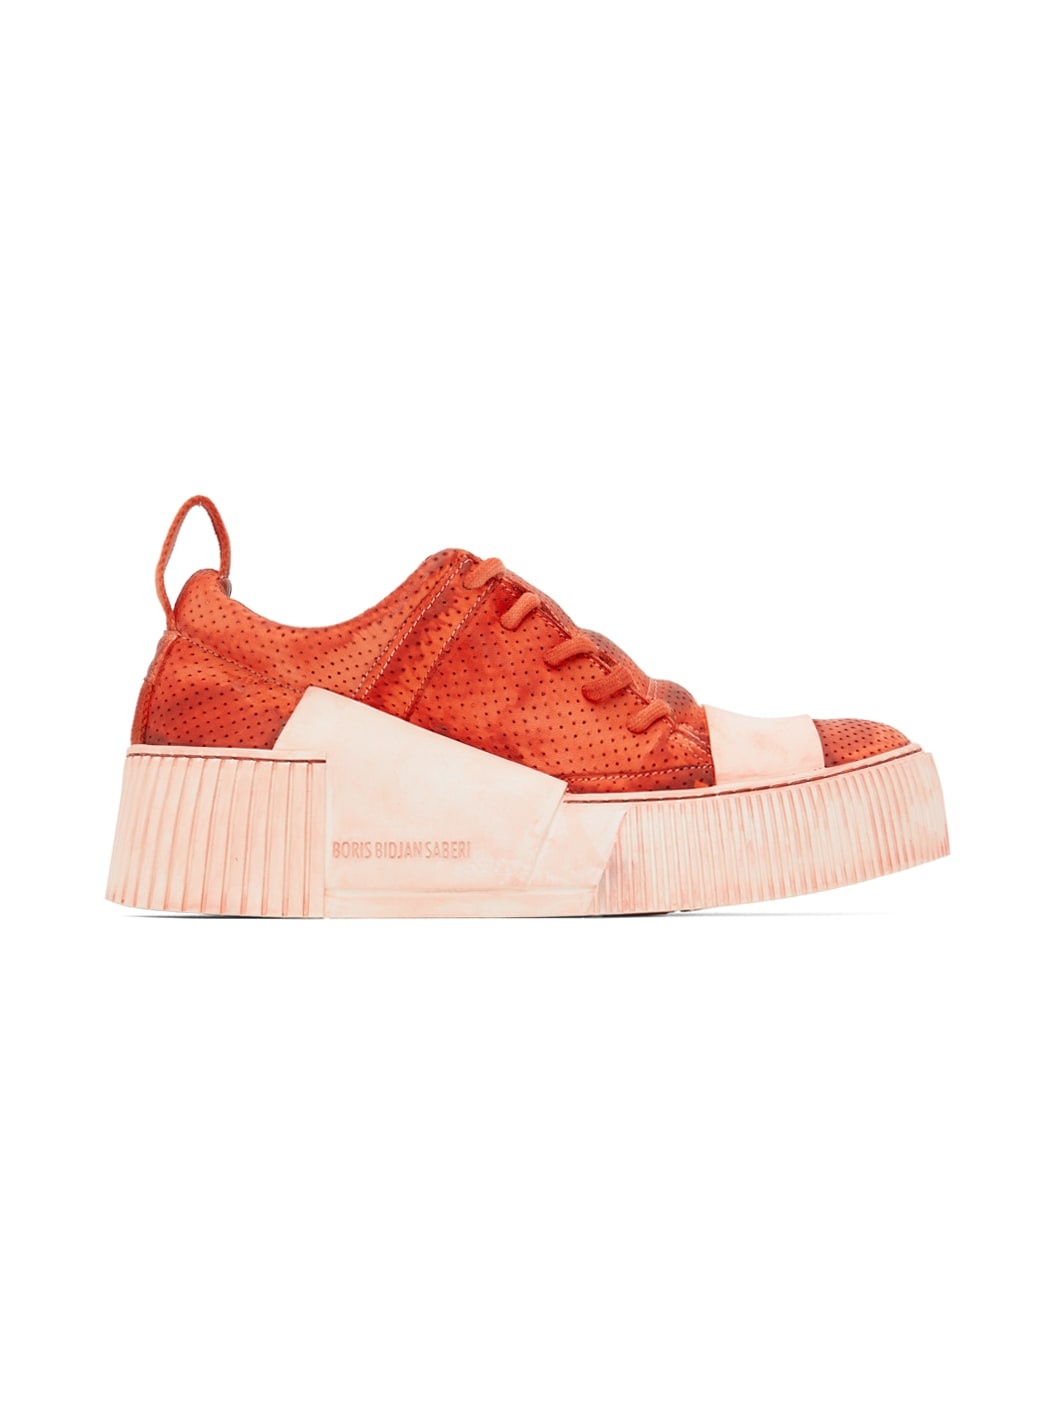 SSENSE Exclusive Red Bamba 2.1 Sneakers - 1